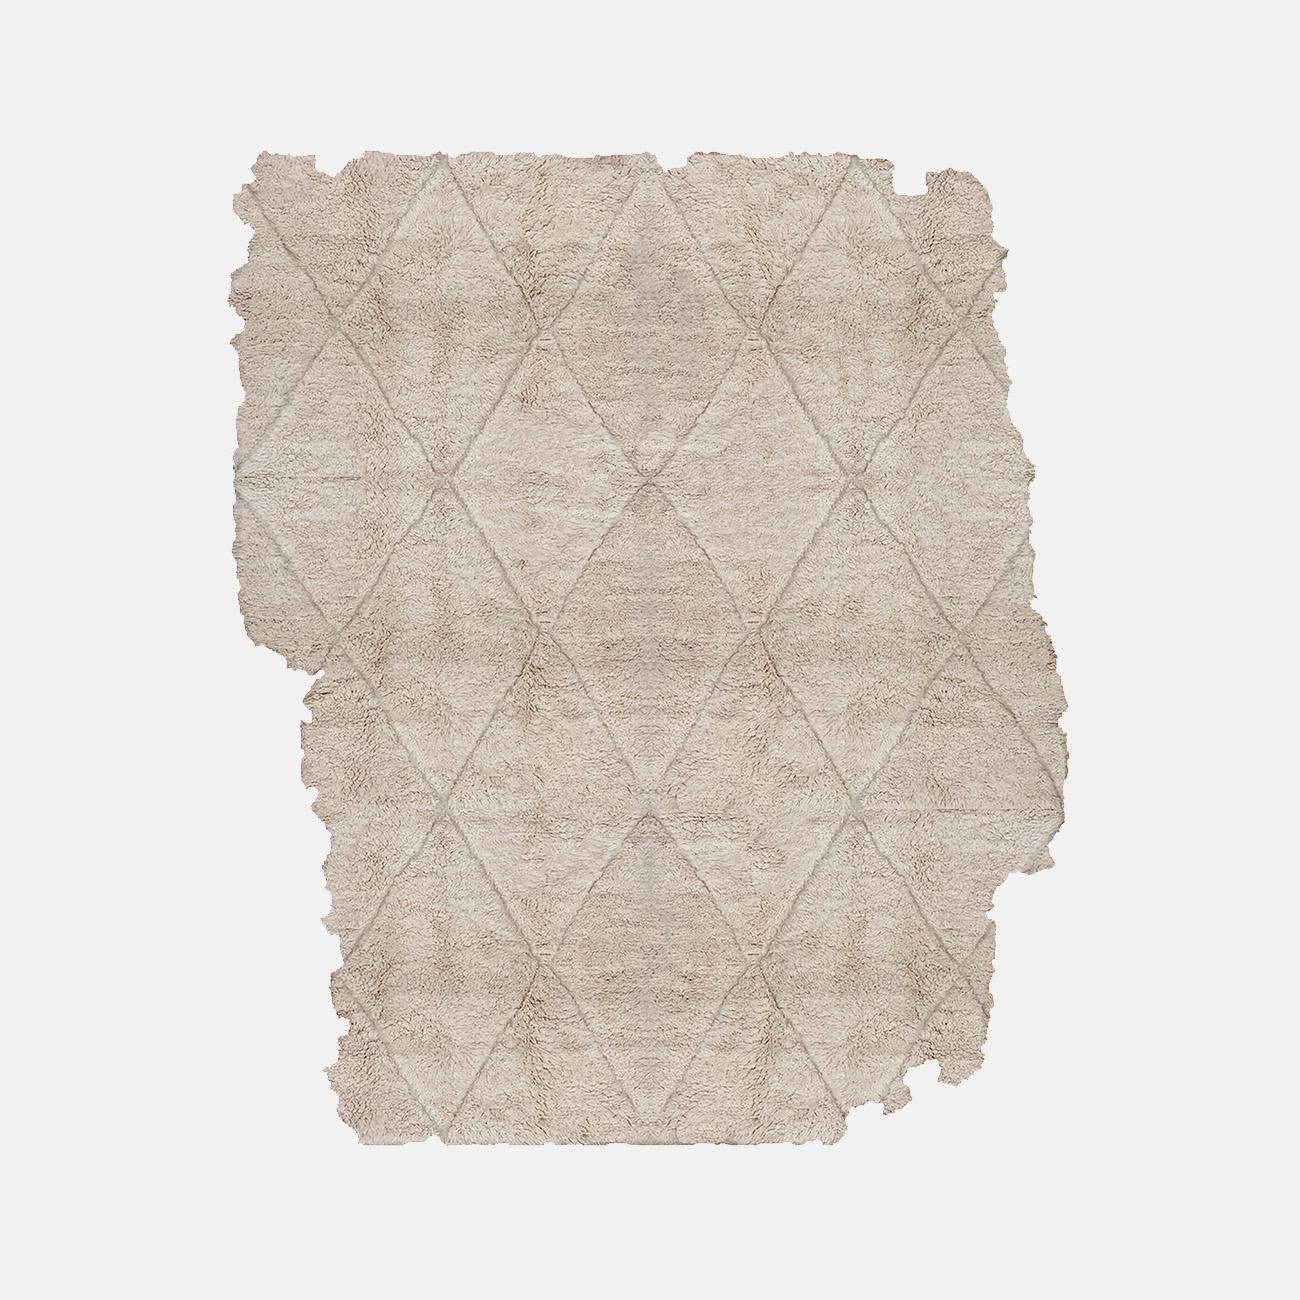 Biondi Dardi Rug by Atelier Bowy C.D.
Dimensions: W 243 x L 350 cm.
Materials: Wool.

Available in W140 x L220, W170 x L240, W210 x L300, W230 x L300, W243 x L350 cm.

Atelier Bowy C.D. is dedicated to crafting contemporary handmade rugs for